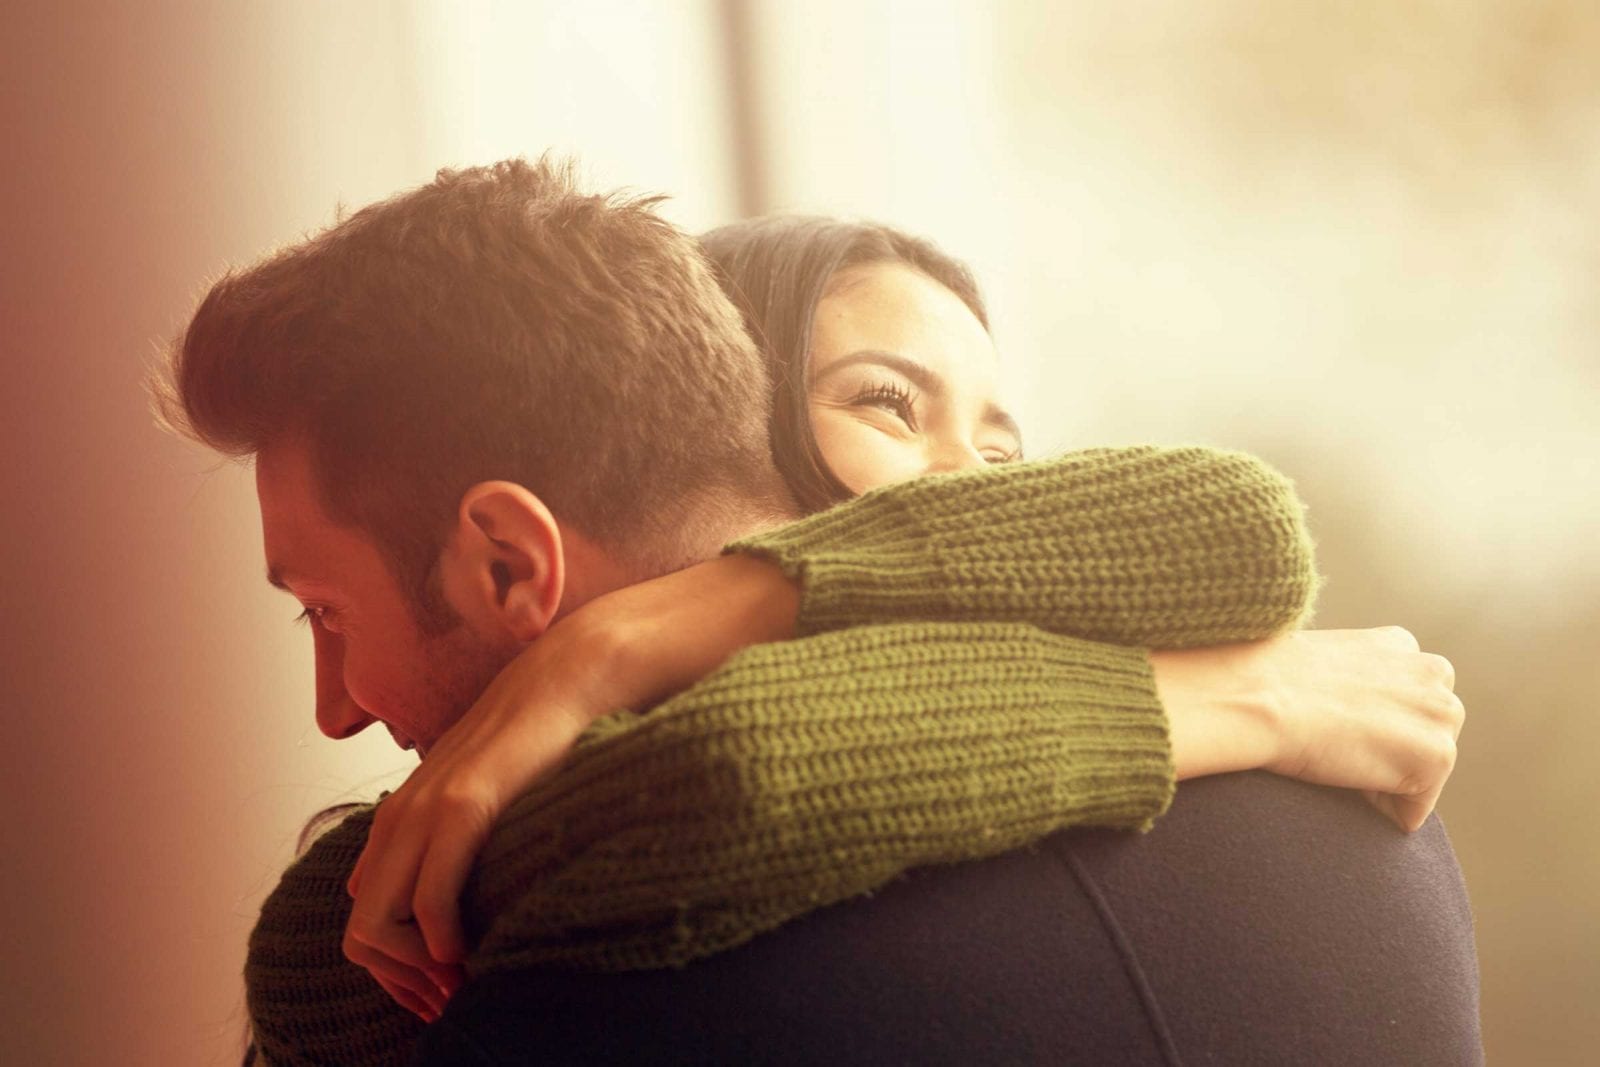 Hugging can increase life expectancy